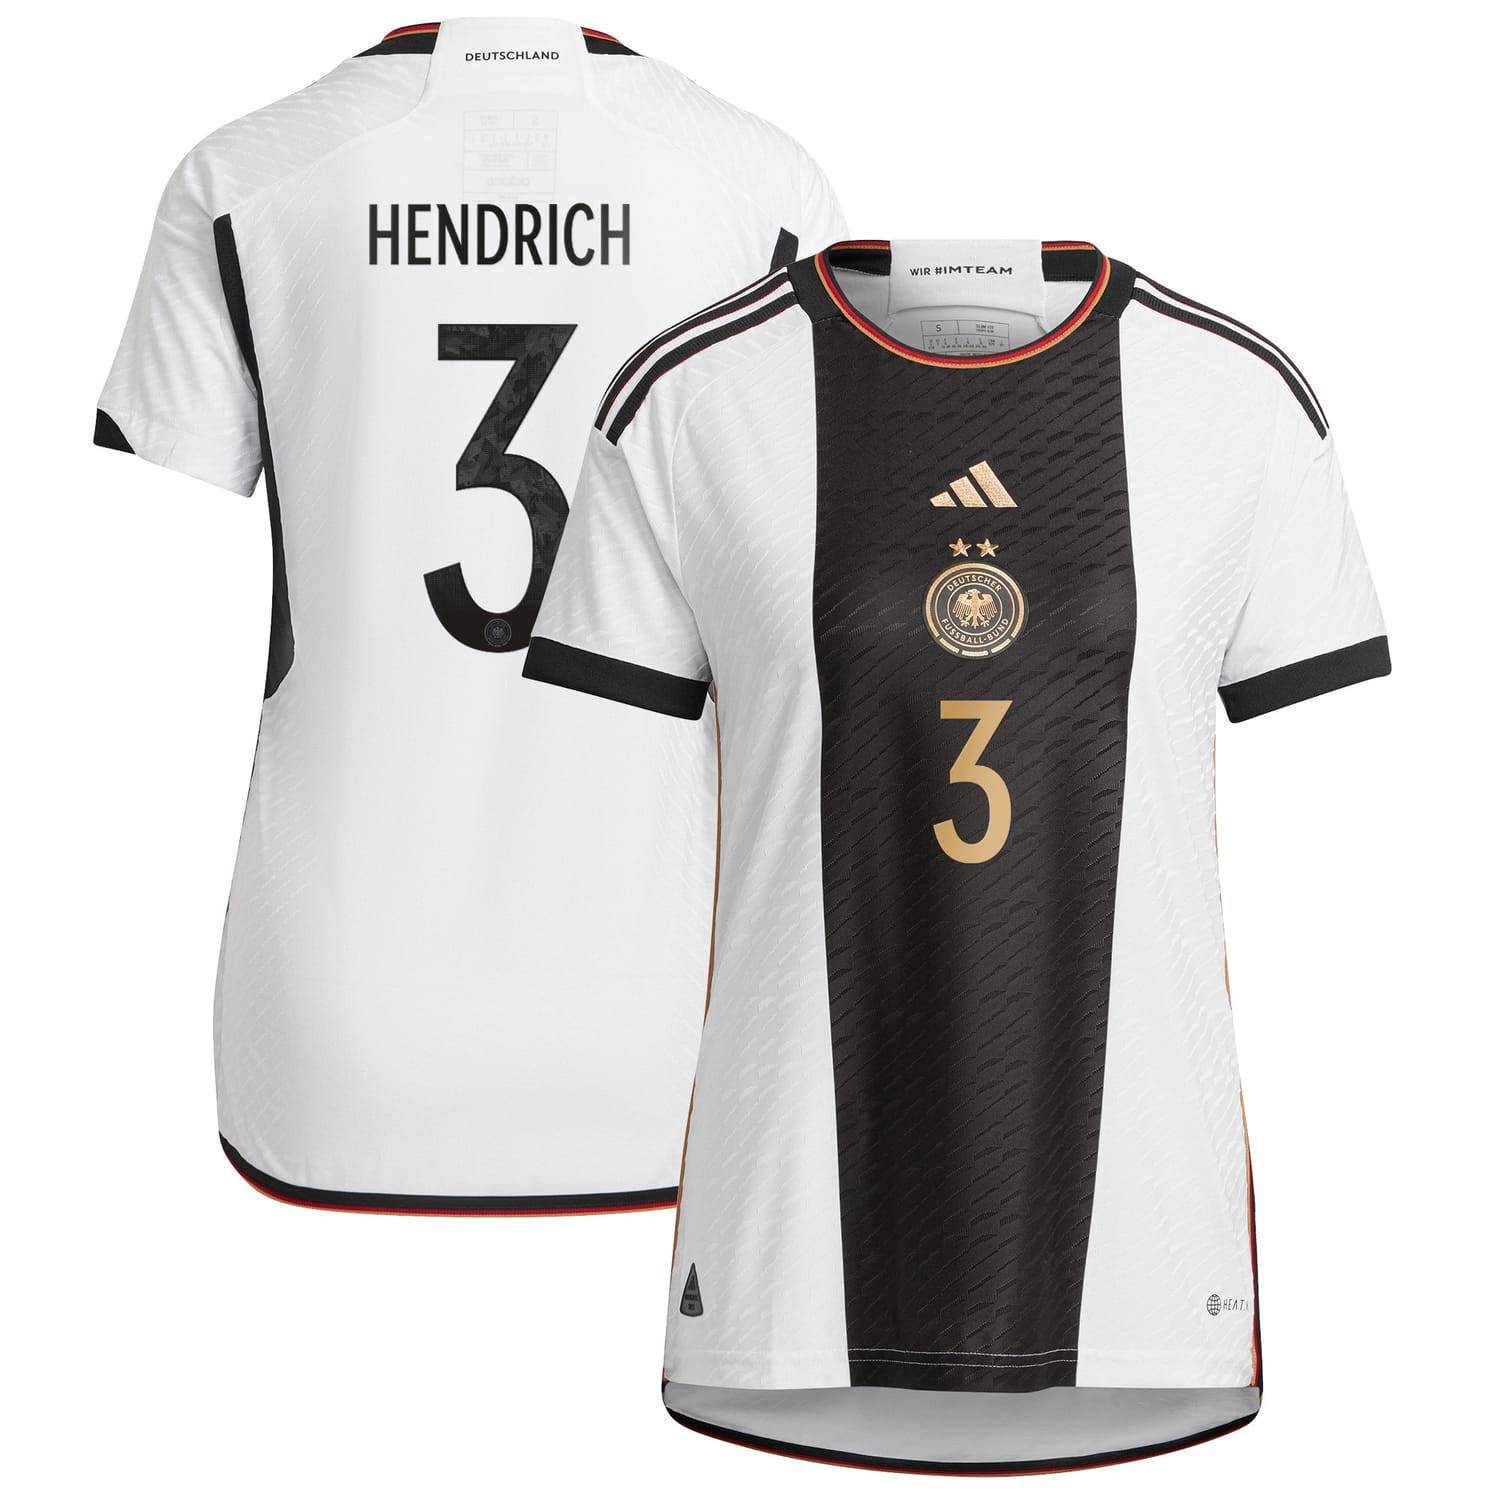 Germany National Team Home Authentic Jersey Shirt player Kathrin Hendrich 3 printing for Women